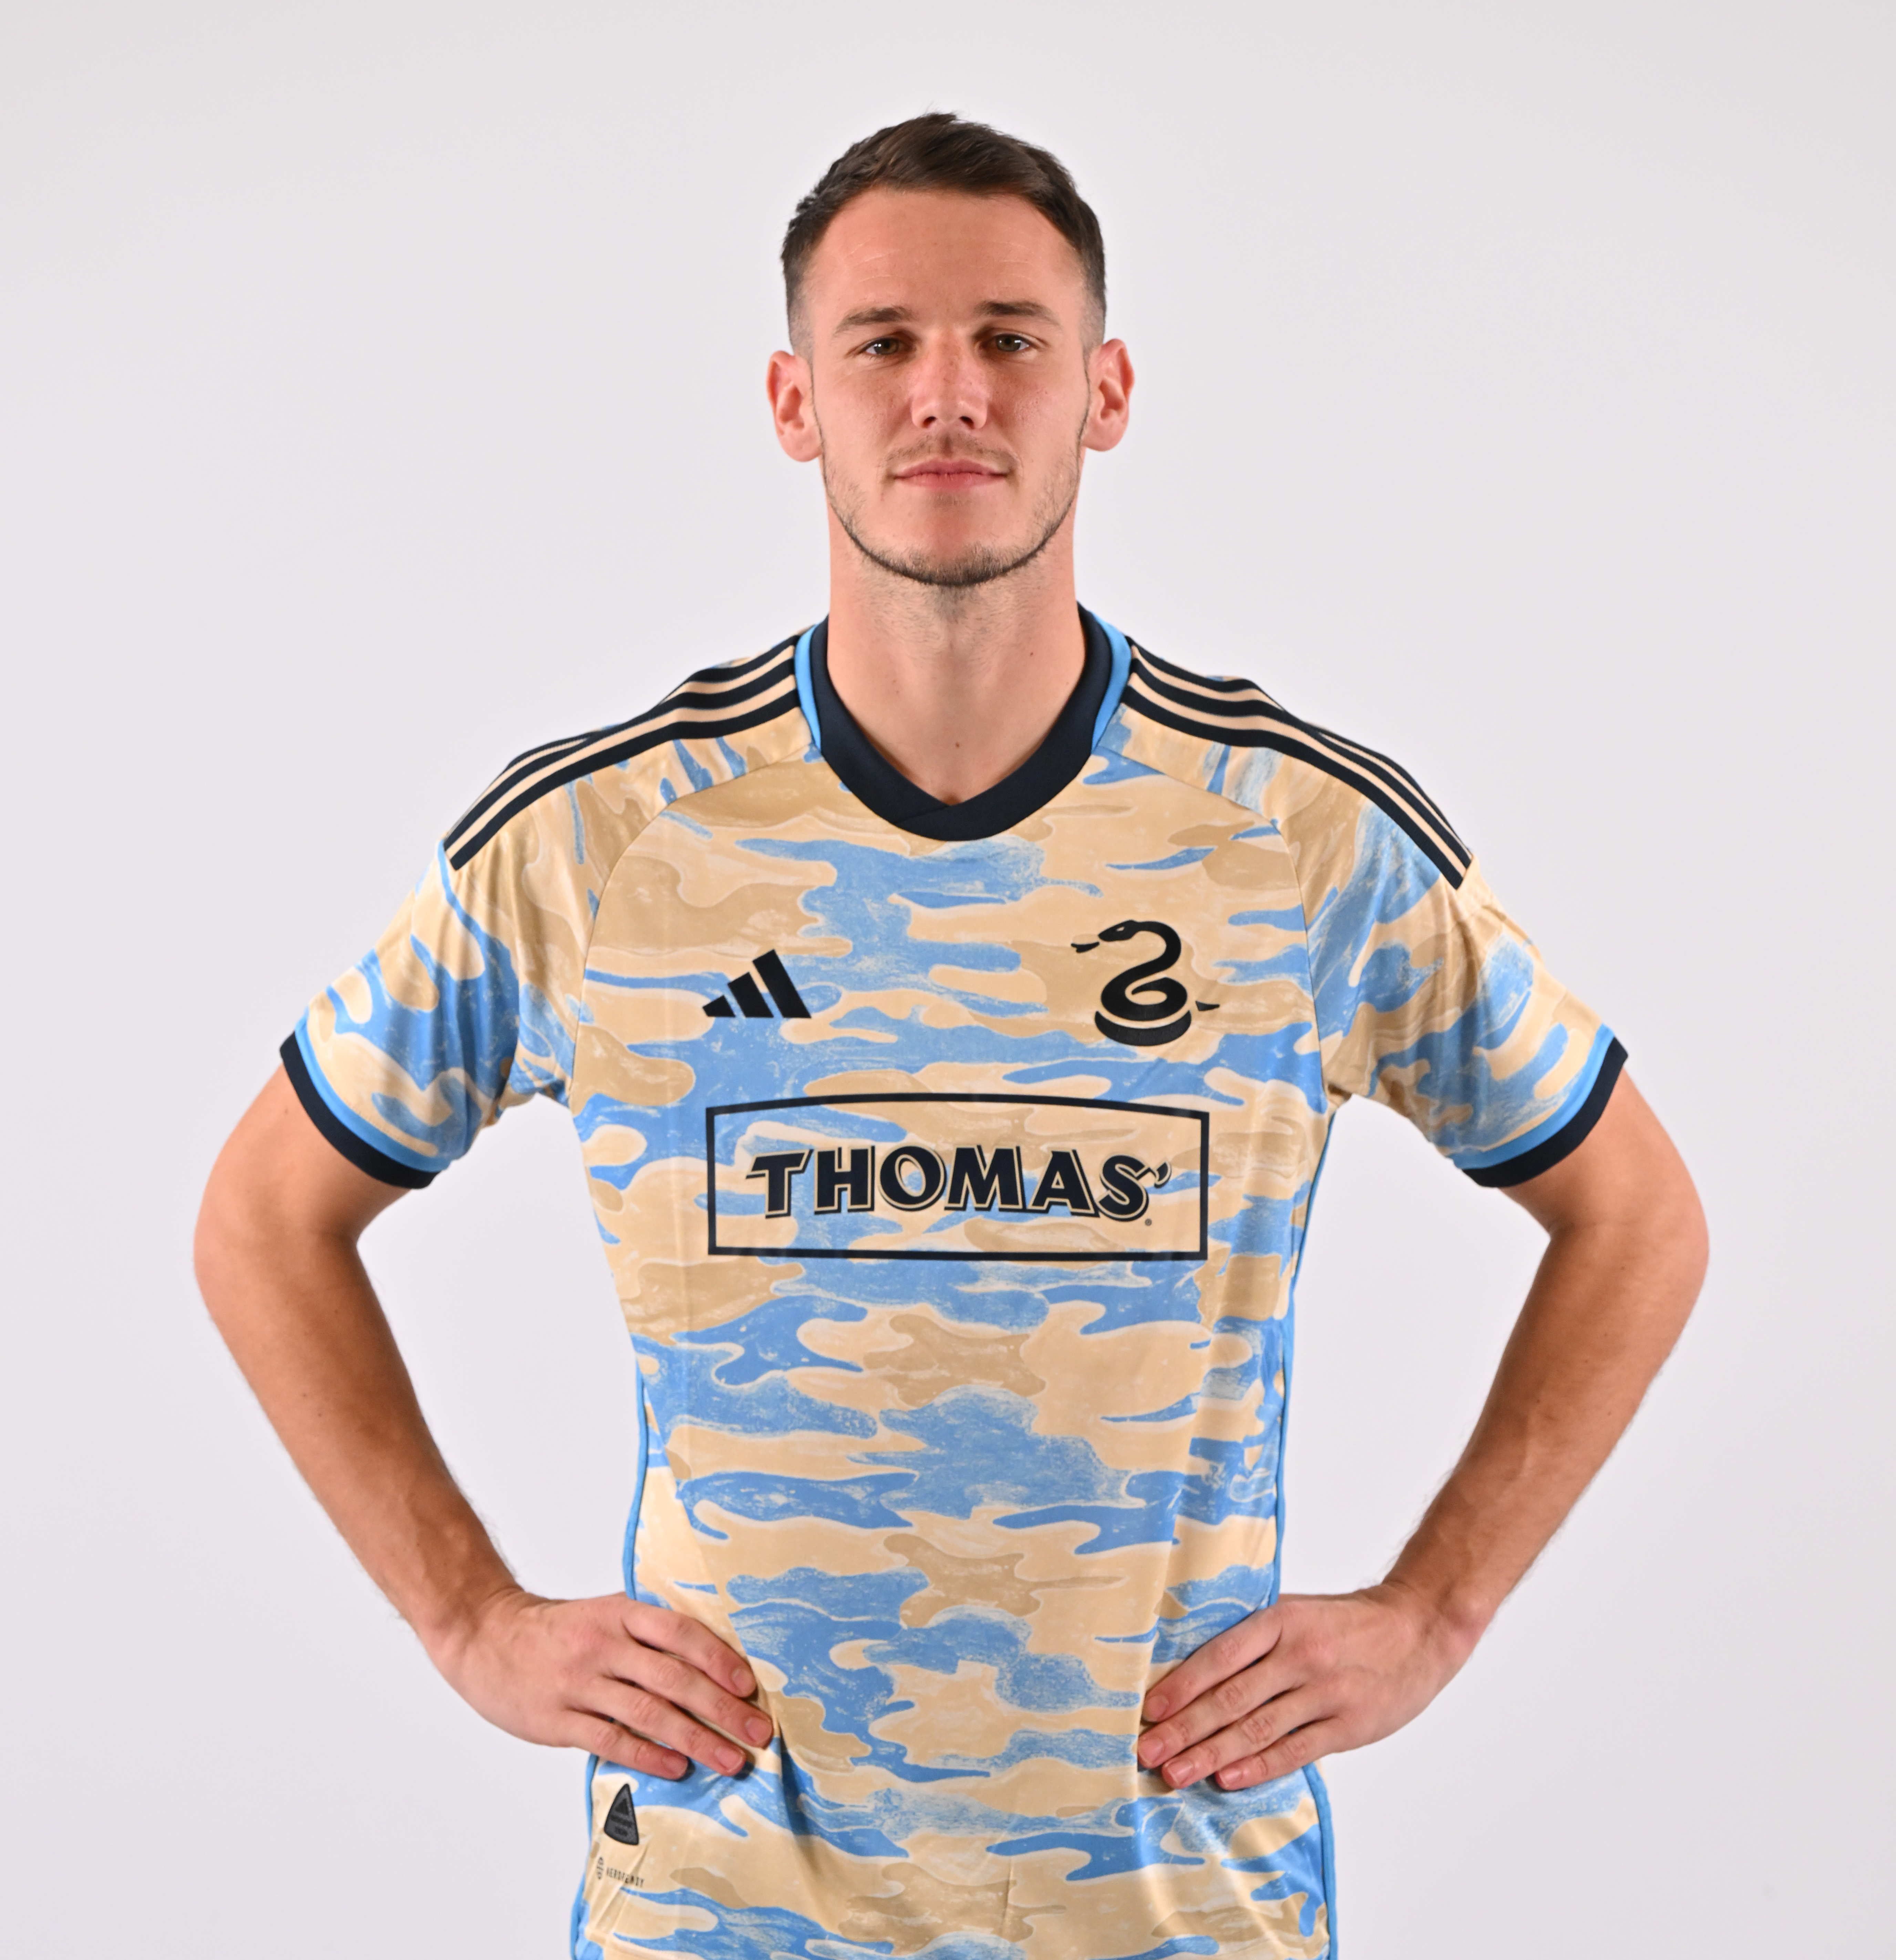 Union unveil fan-designed jersey for upcoming 2021 season